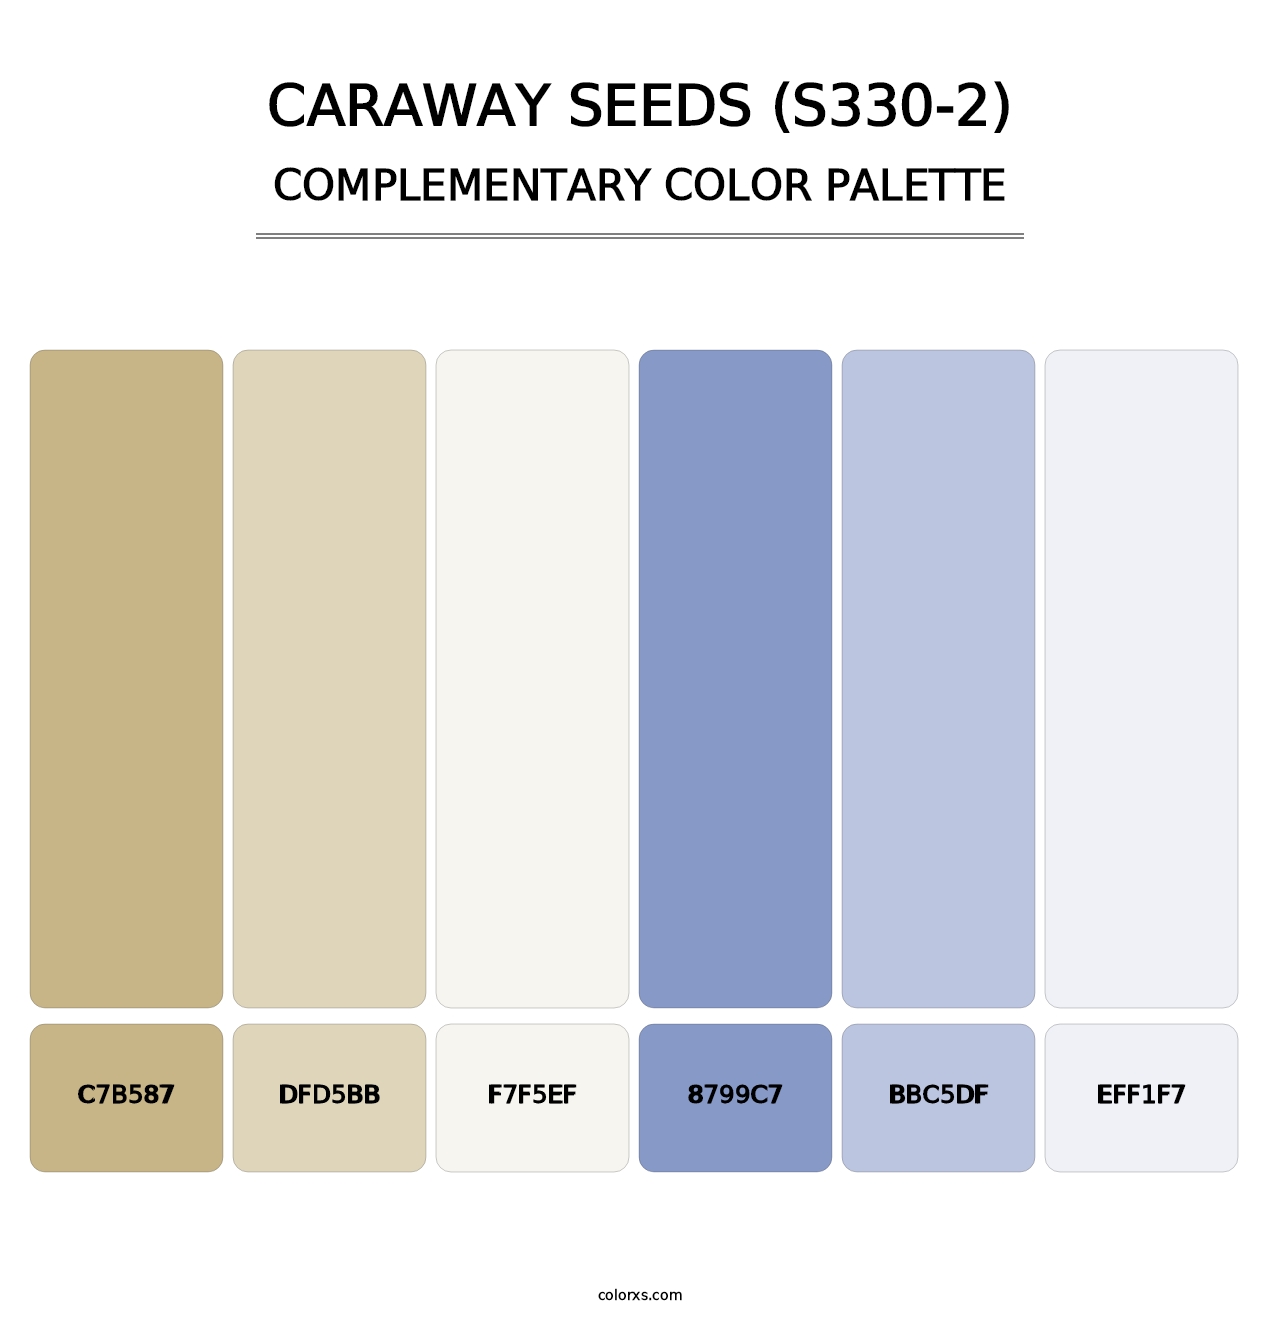 Caraway Seeds (S330-2) - Complementary Color Palette